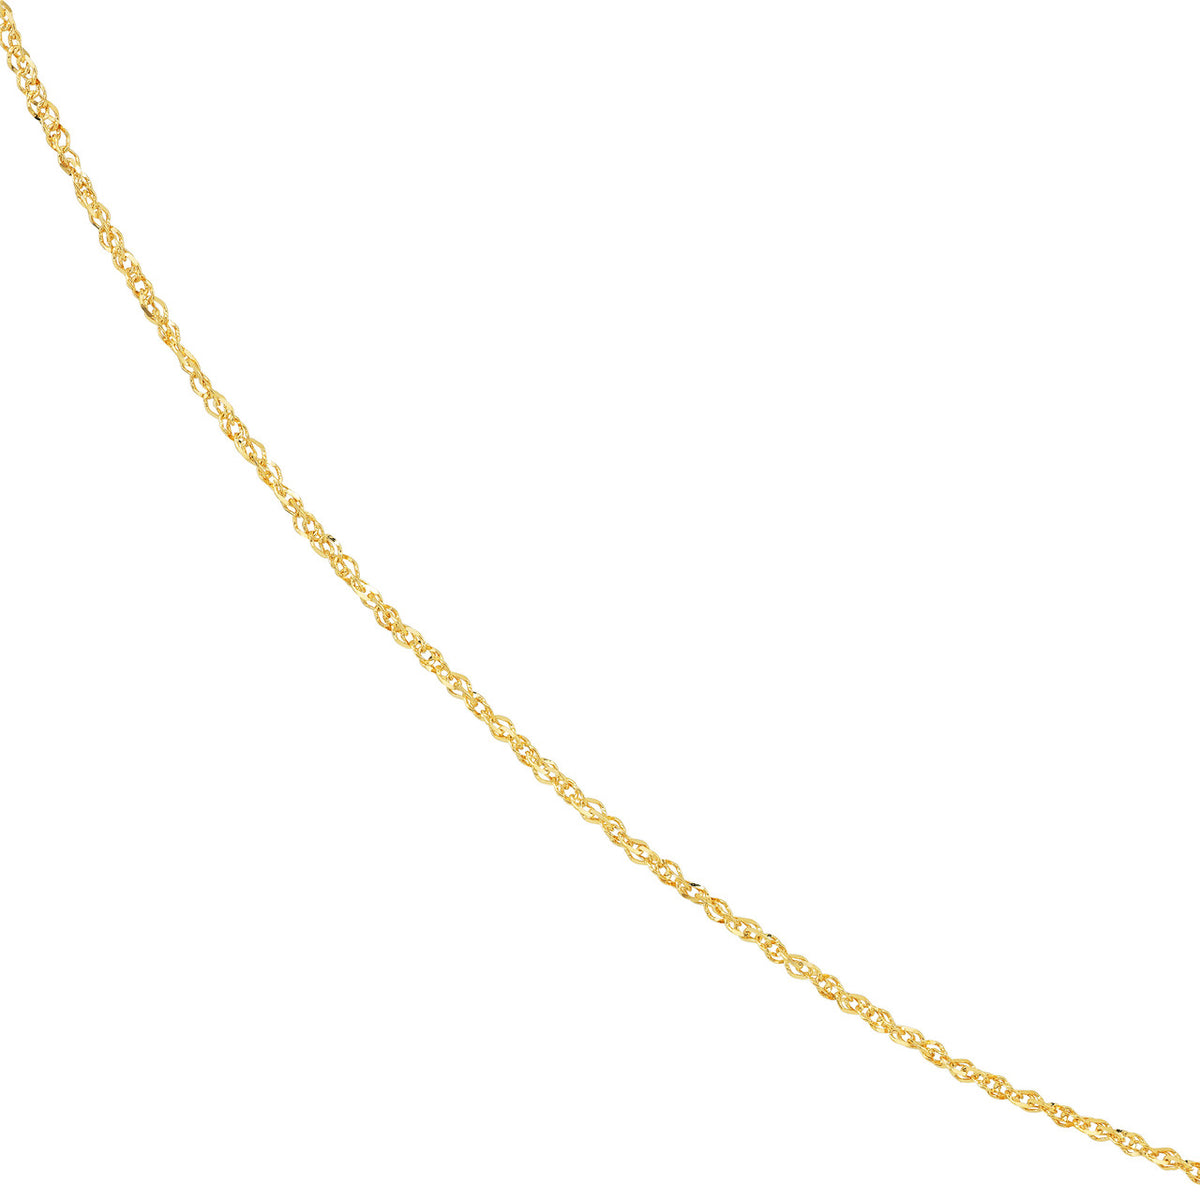 14K Yellow Gold or White Gold 1.37mm Sparkle Singapore Chain Necklace with Lobster Lock